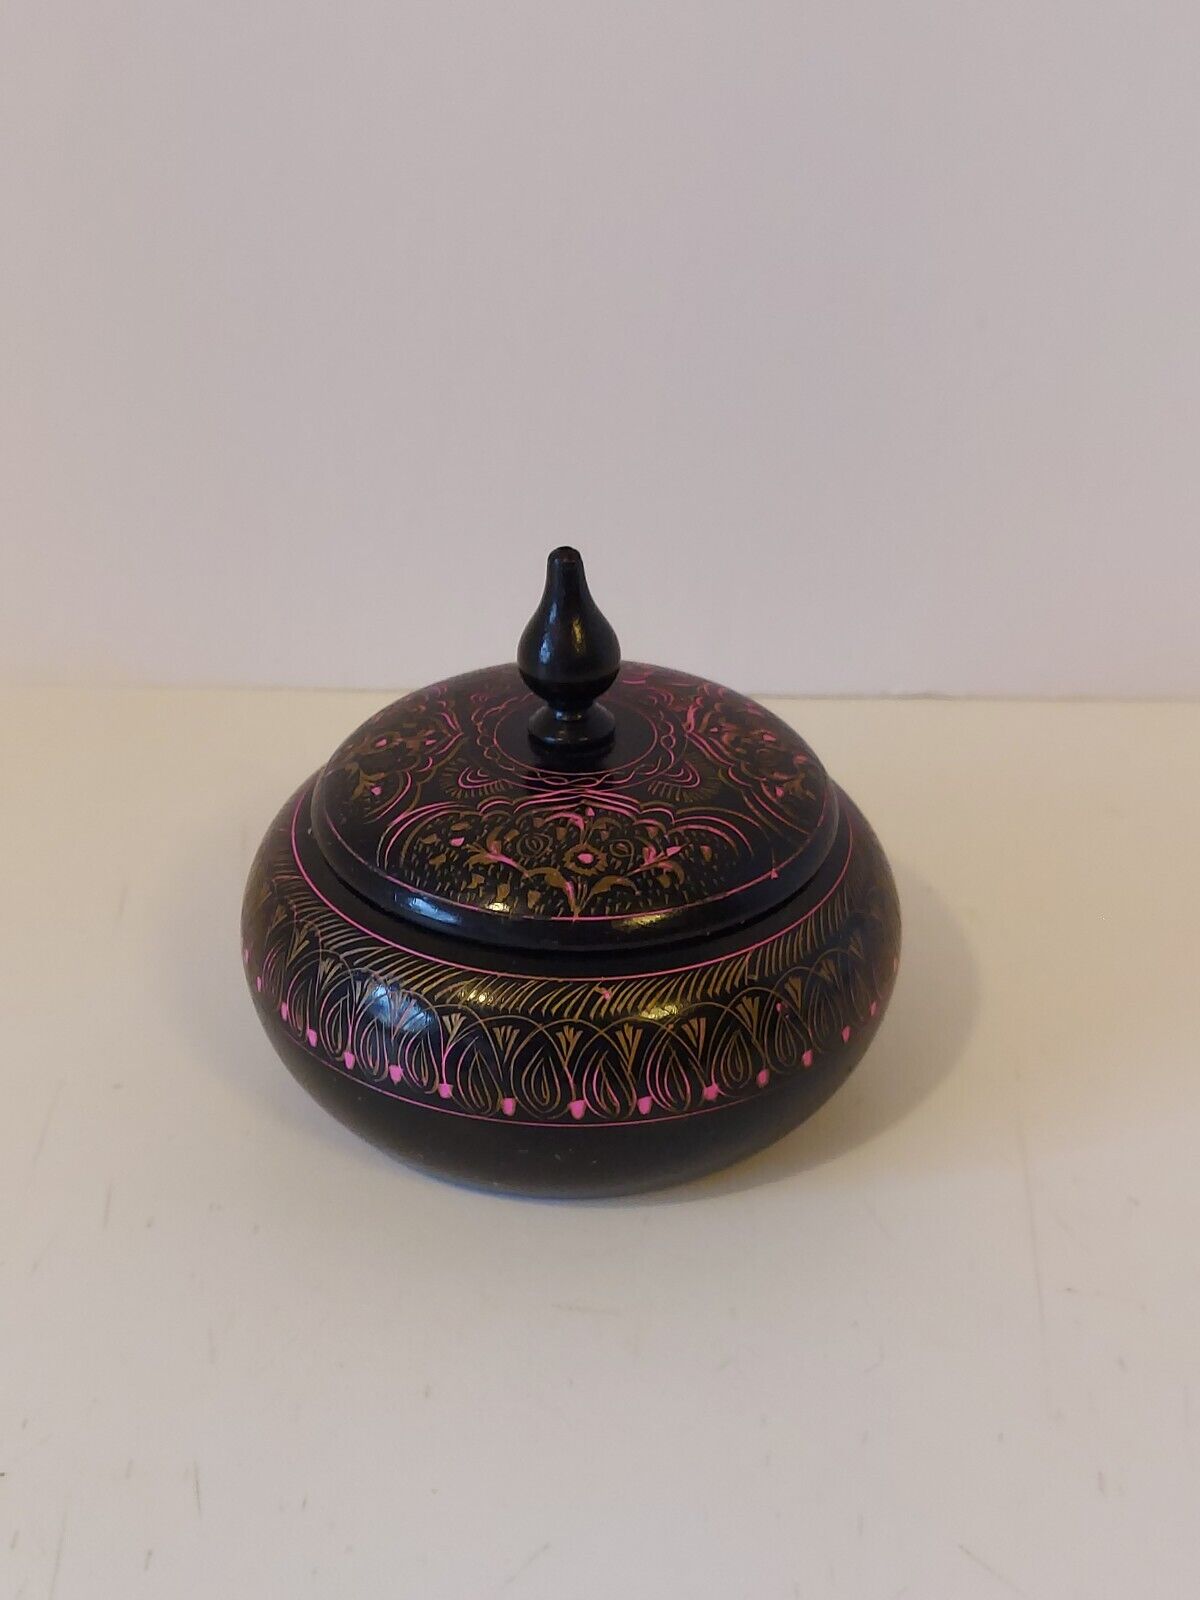 Handmade Etched Lacquerware Lidded Trinket Box